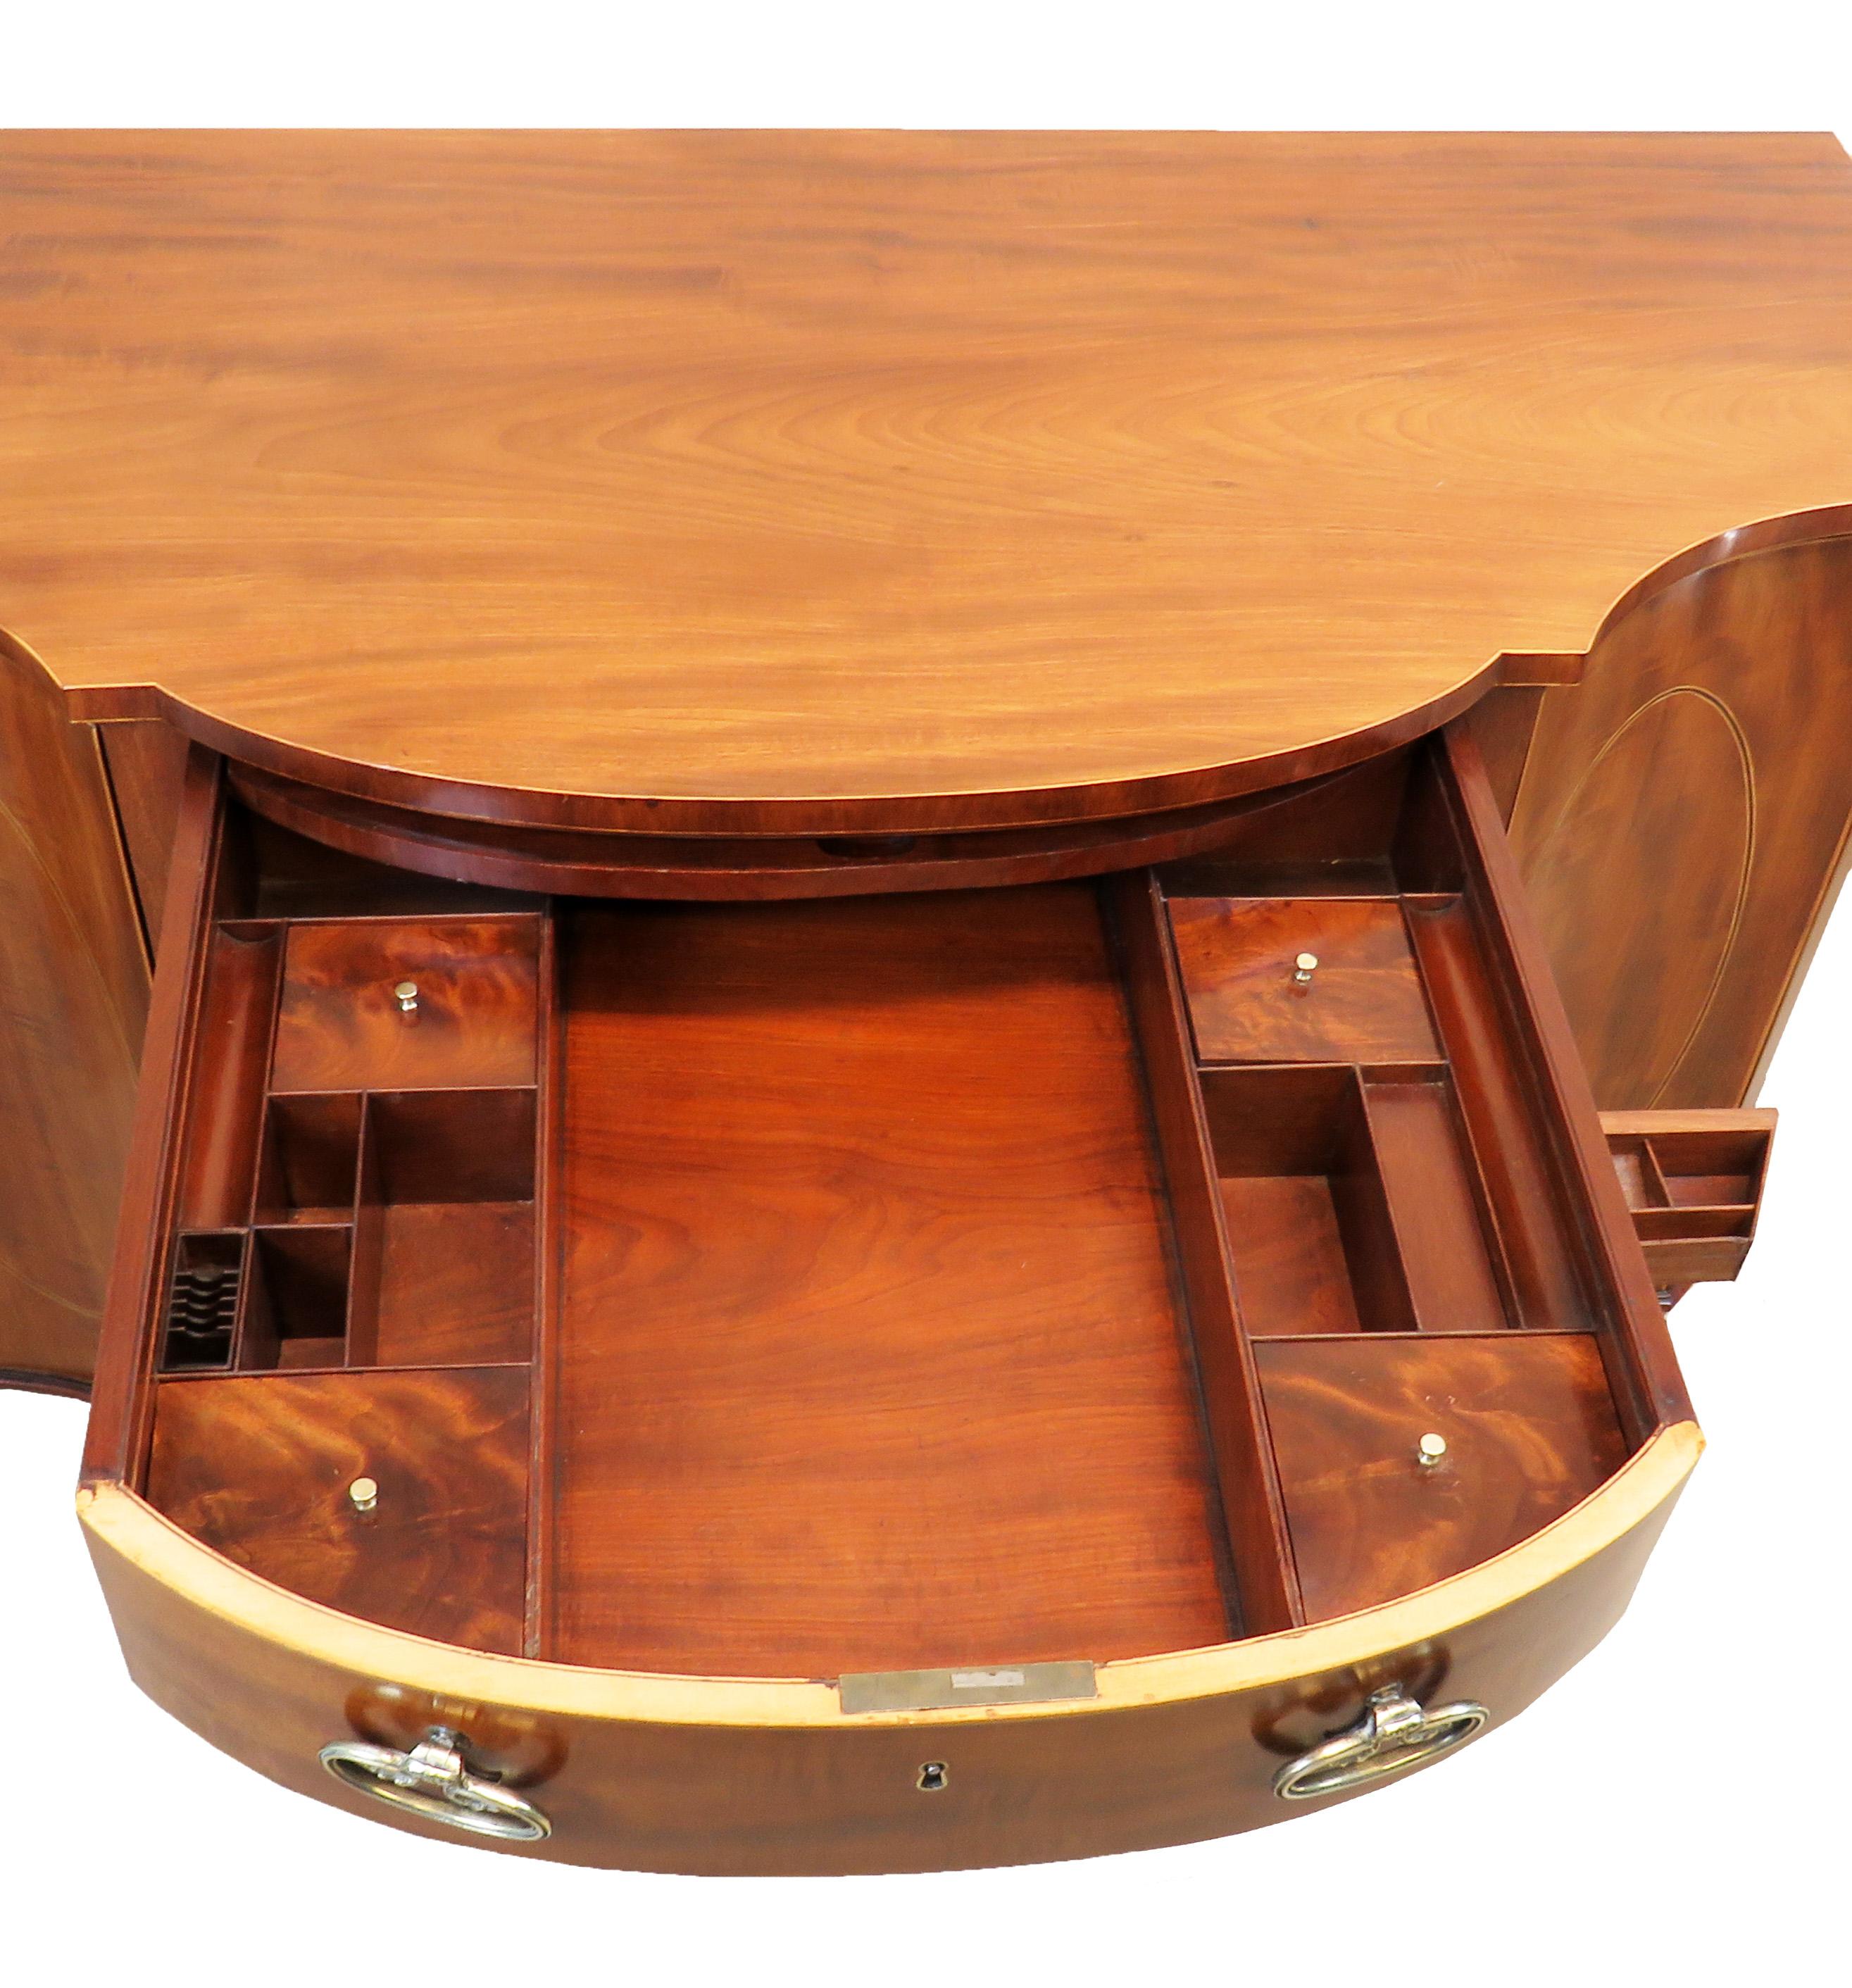 A very Fine quality late 18th century mahogany serpentine
Dressing table side cabinet having well figured top over
Central drawer with fitted interior retaining original brass
Handles flanked by curved cupboard doors raised on
Elegant square